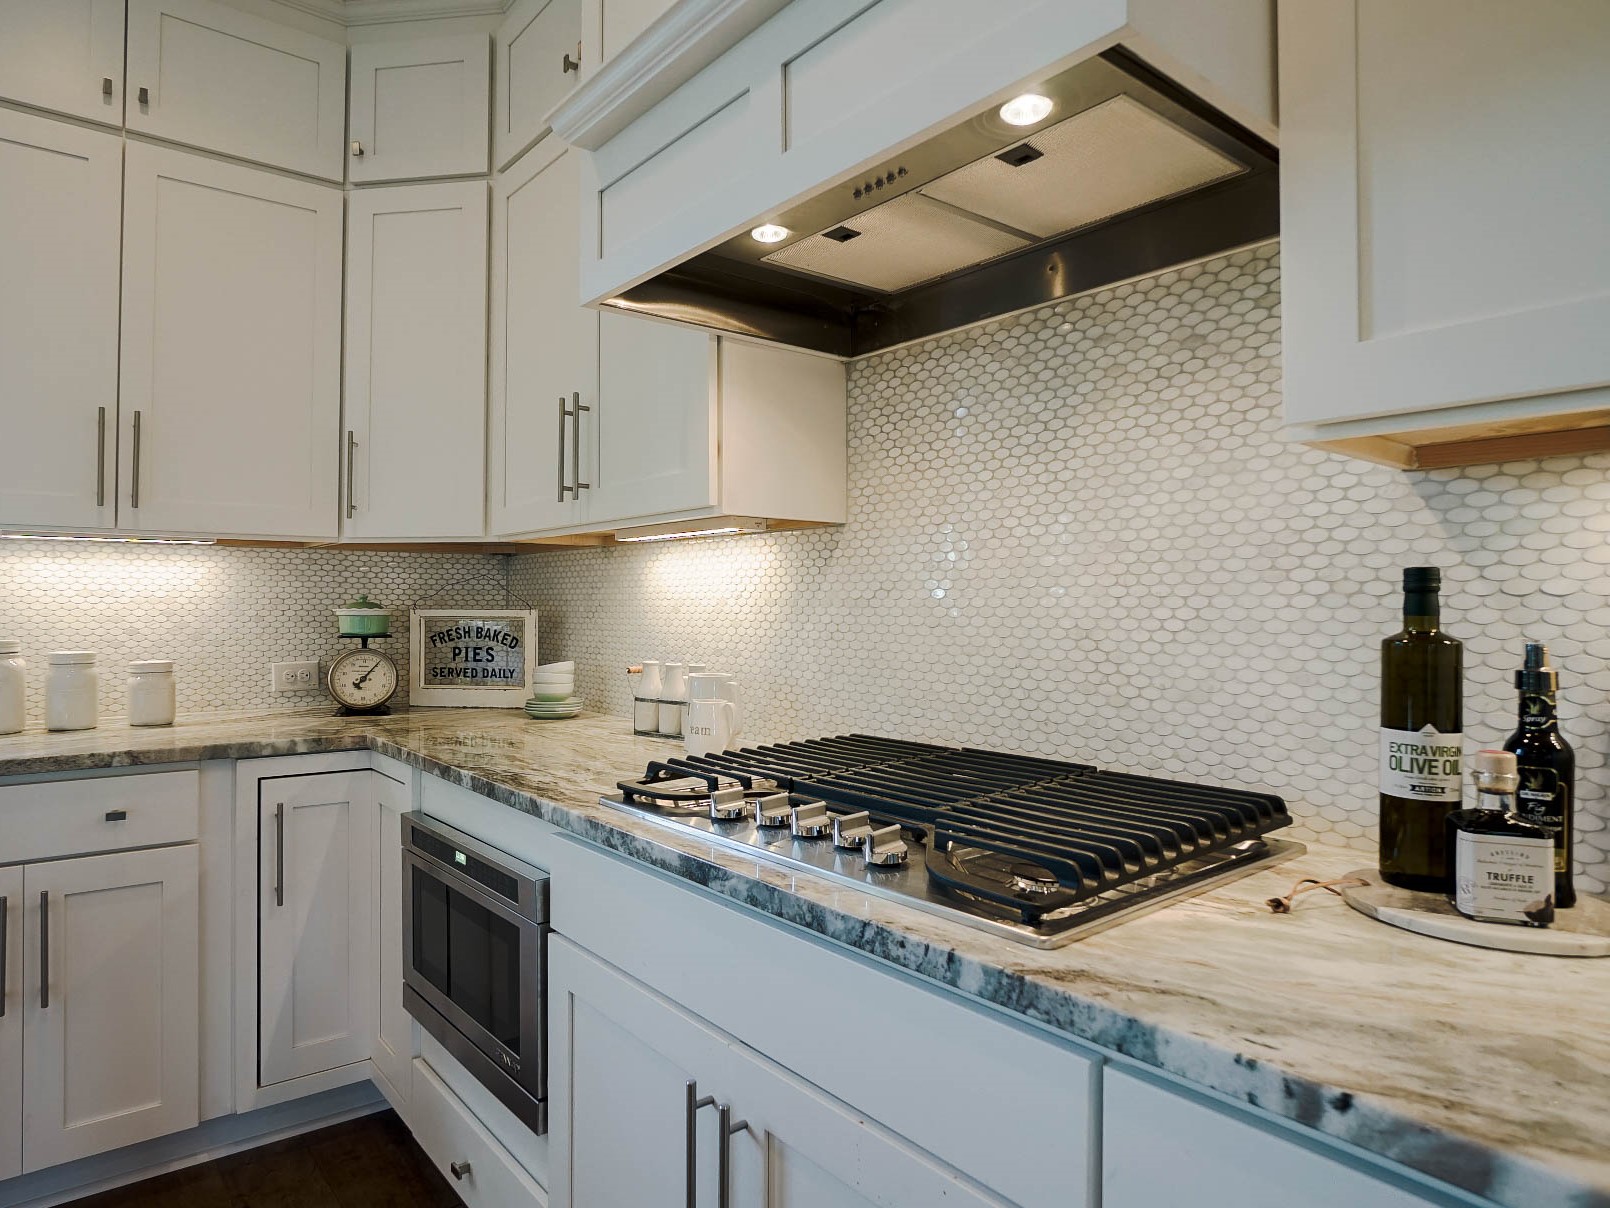 The builders at Traditions of Braselton create beautiful kitchens